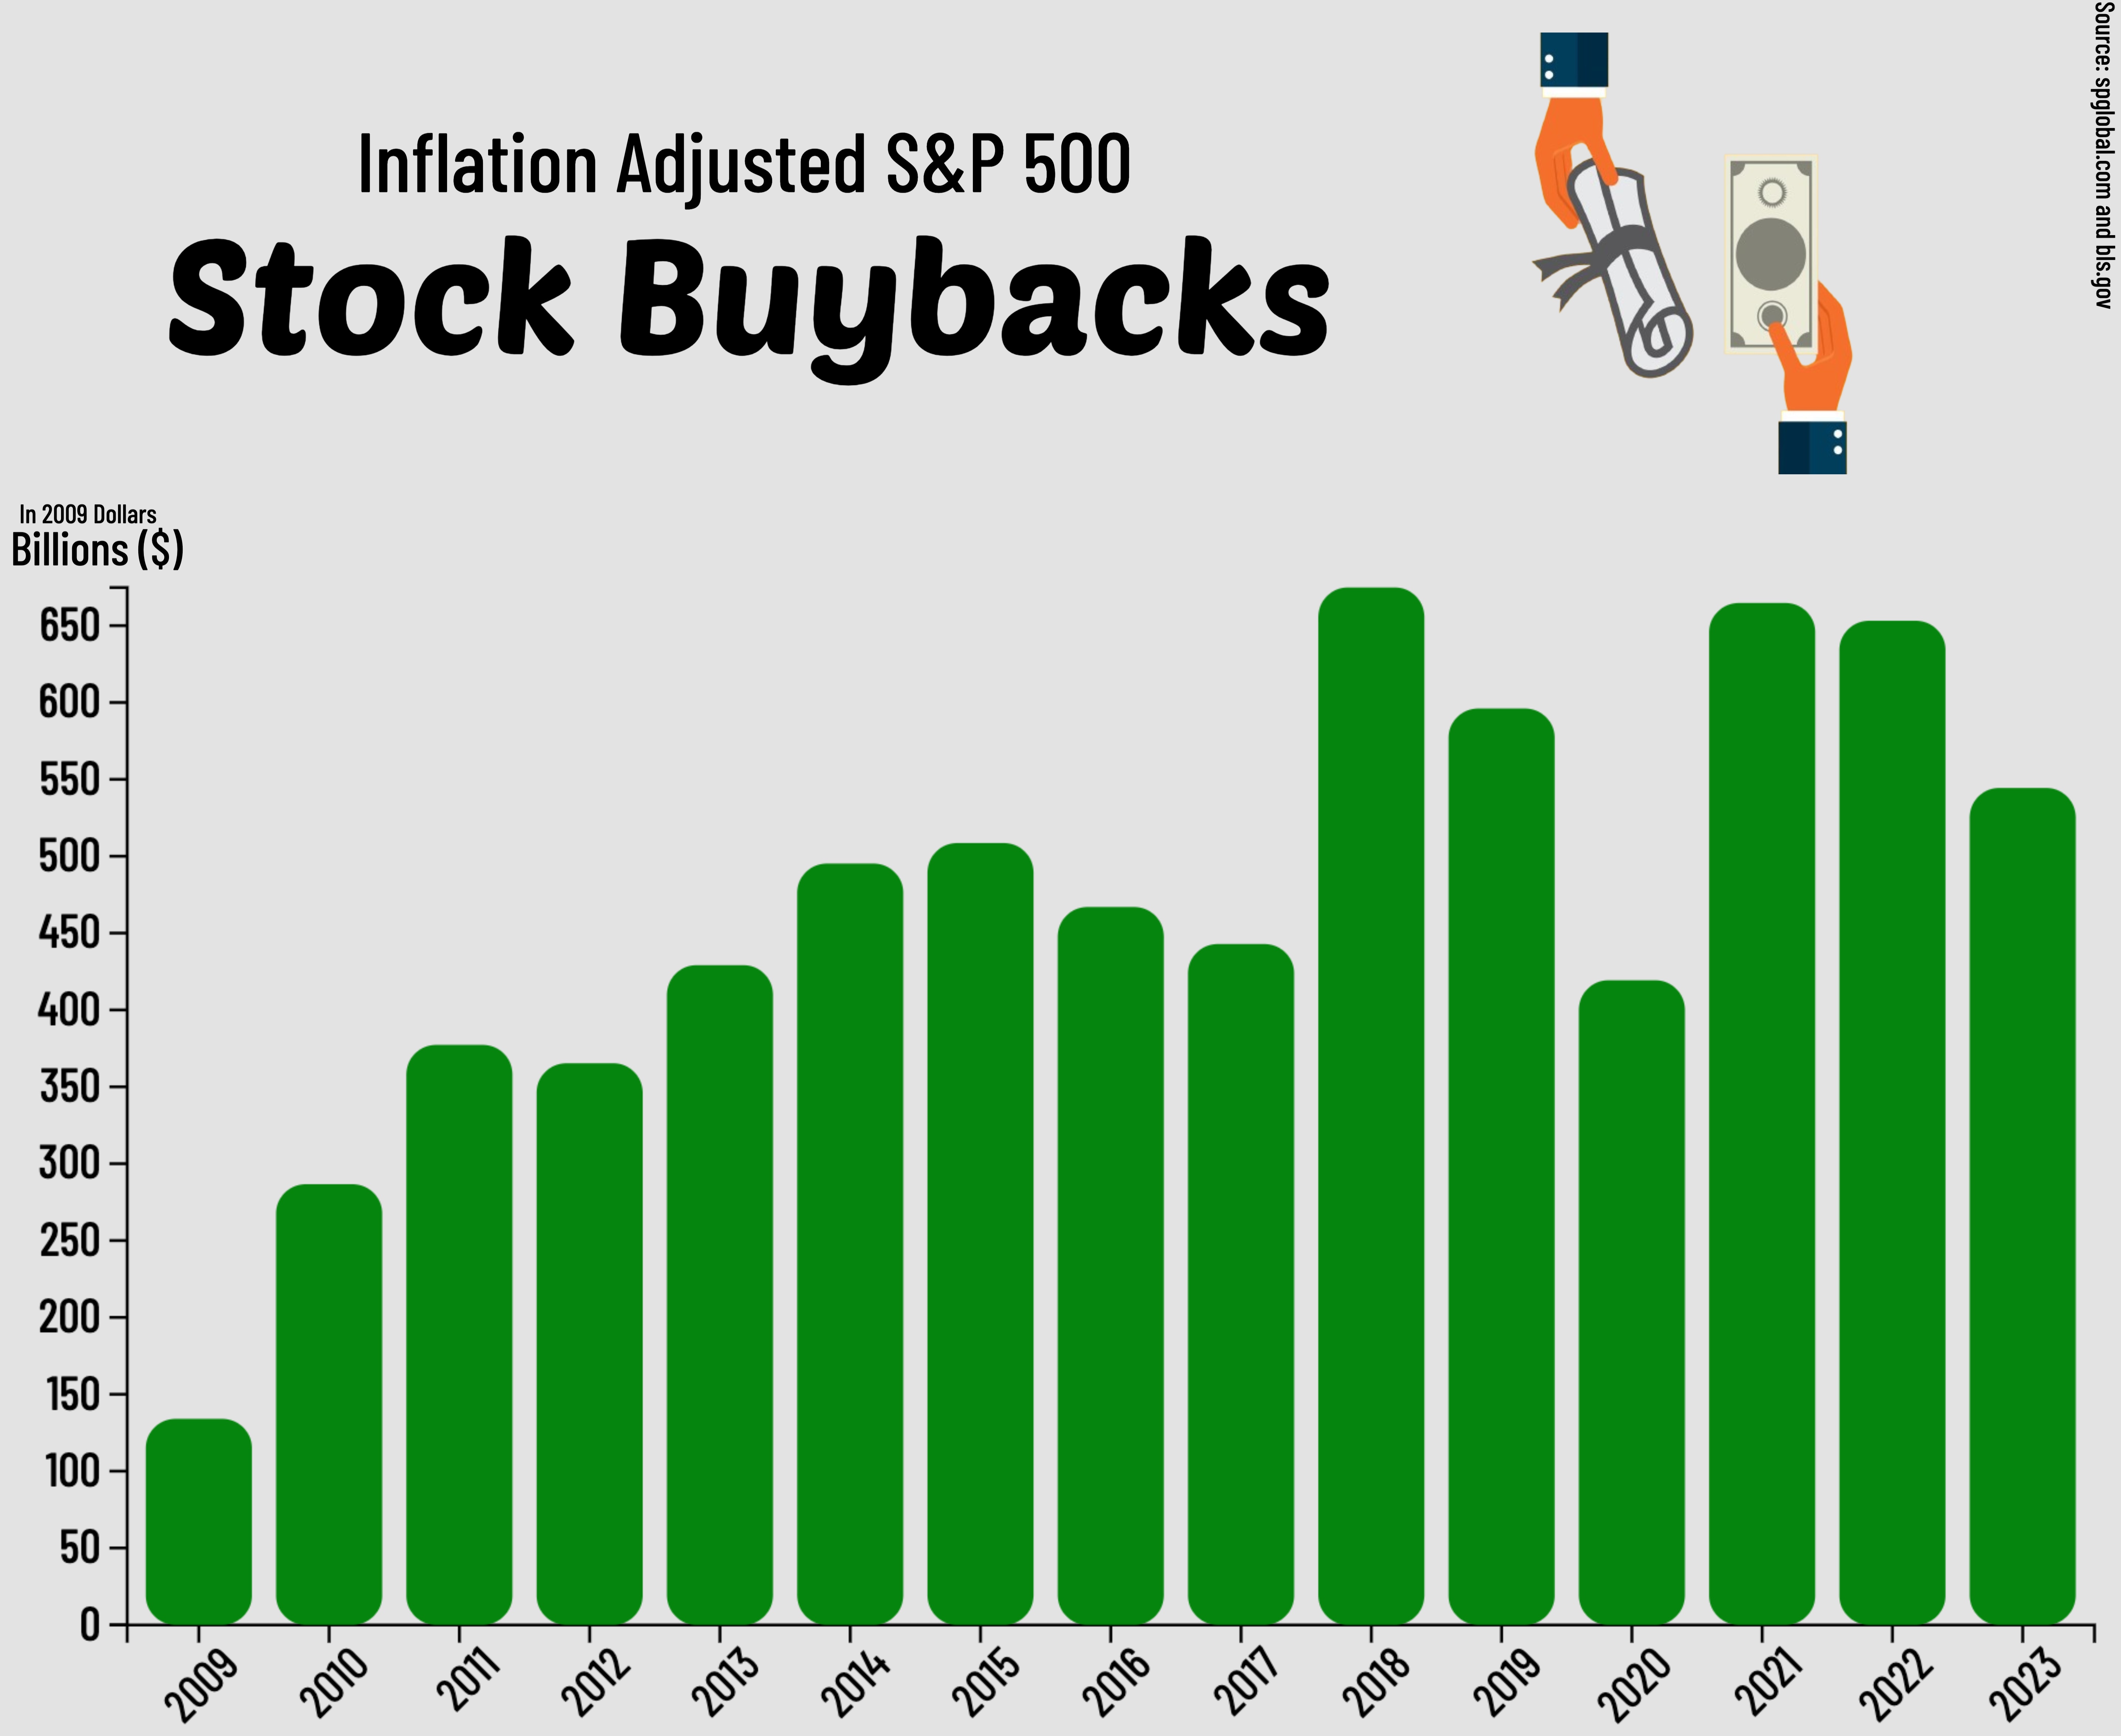 Inflation Adjusted S&P500 Stock Buybacks